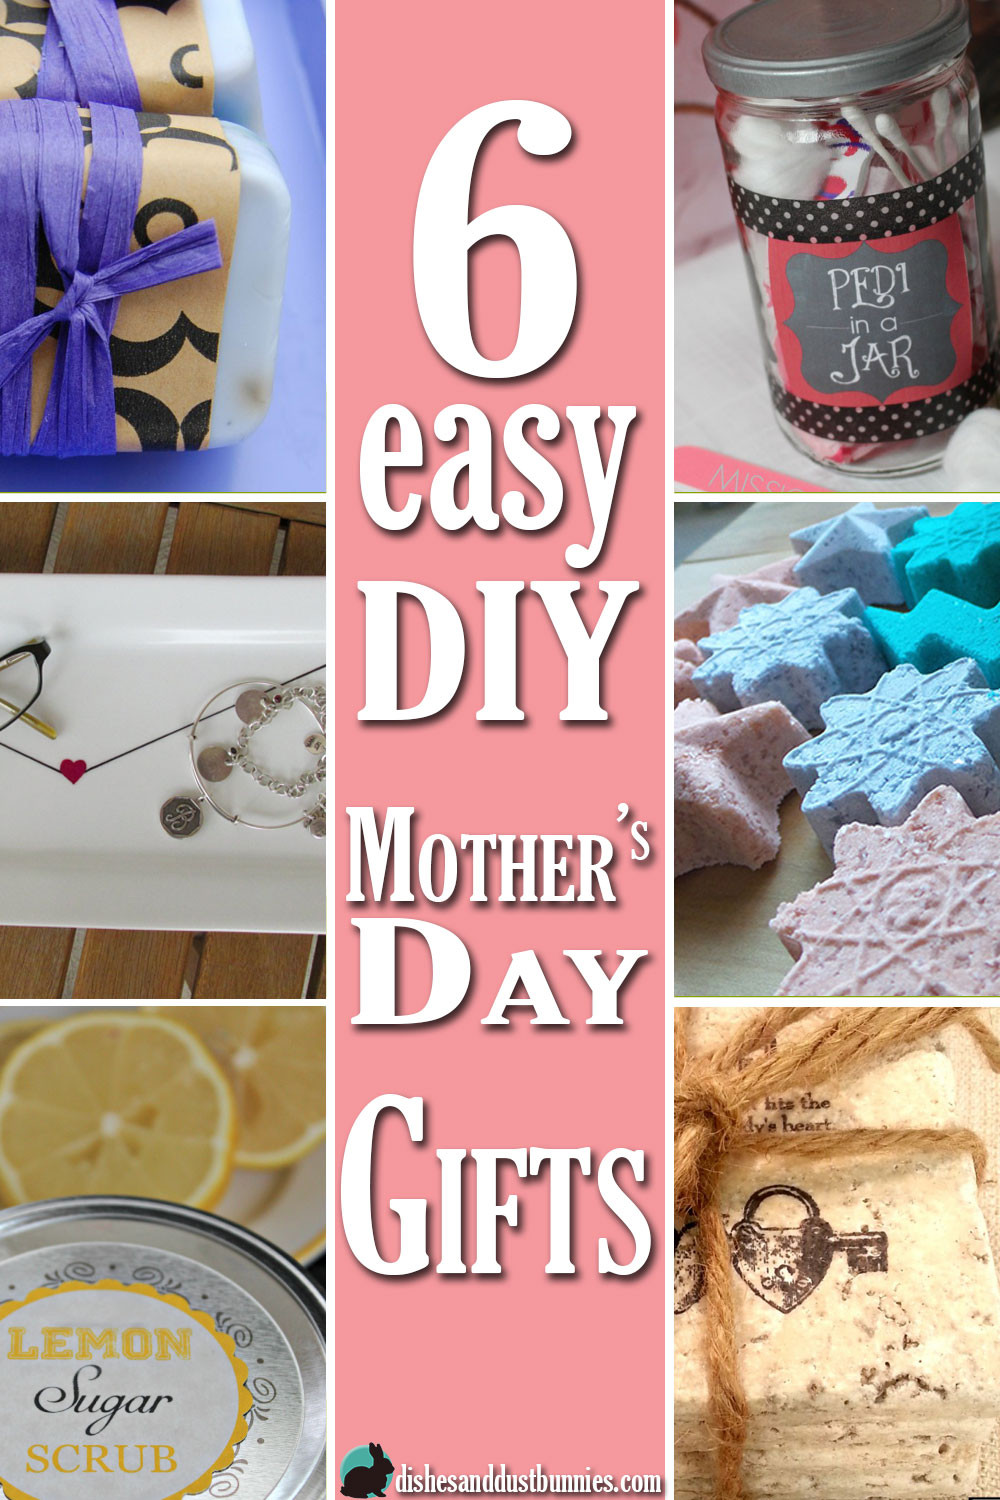 DIY Mothers Day Gifts Easy
 6 Easy DIY Mother s Day Gifts Dishes and Dust Bunnies